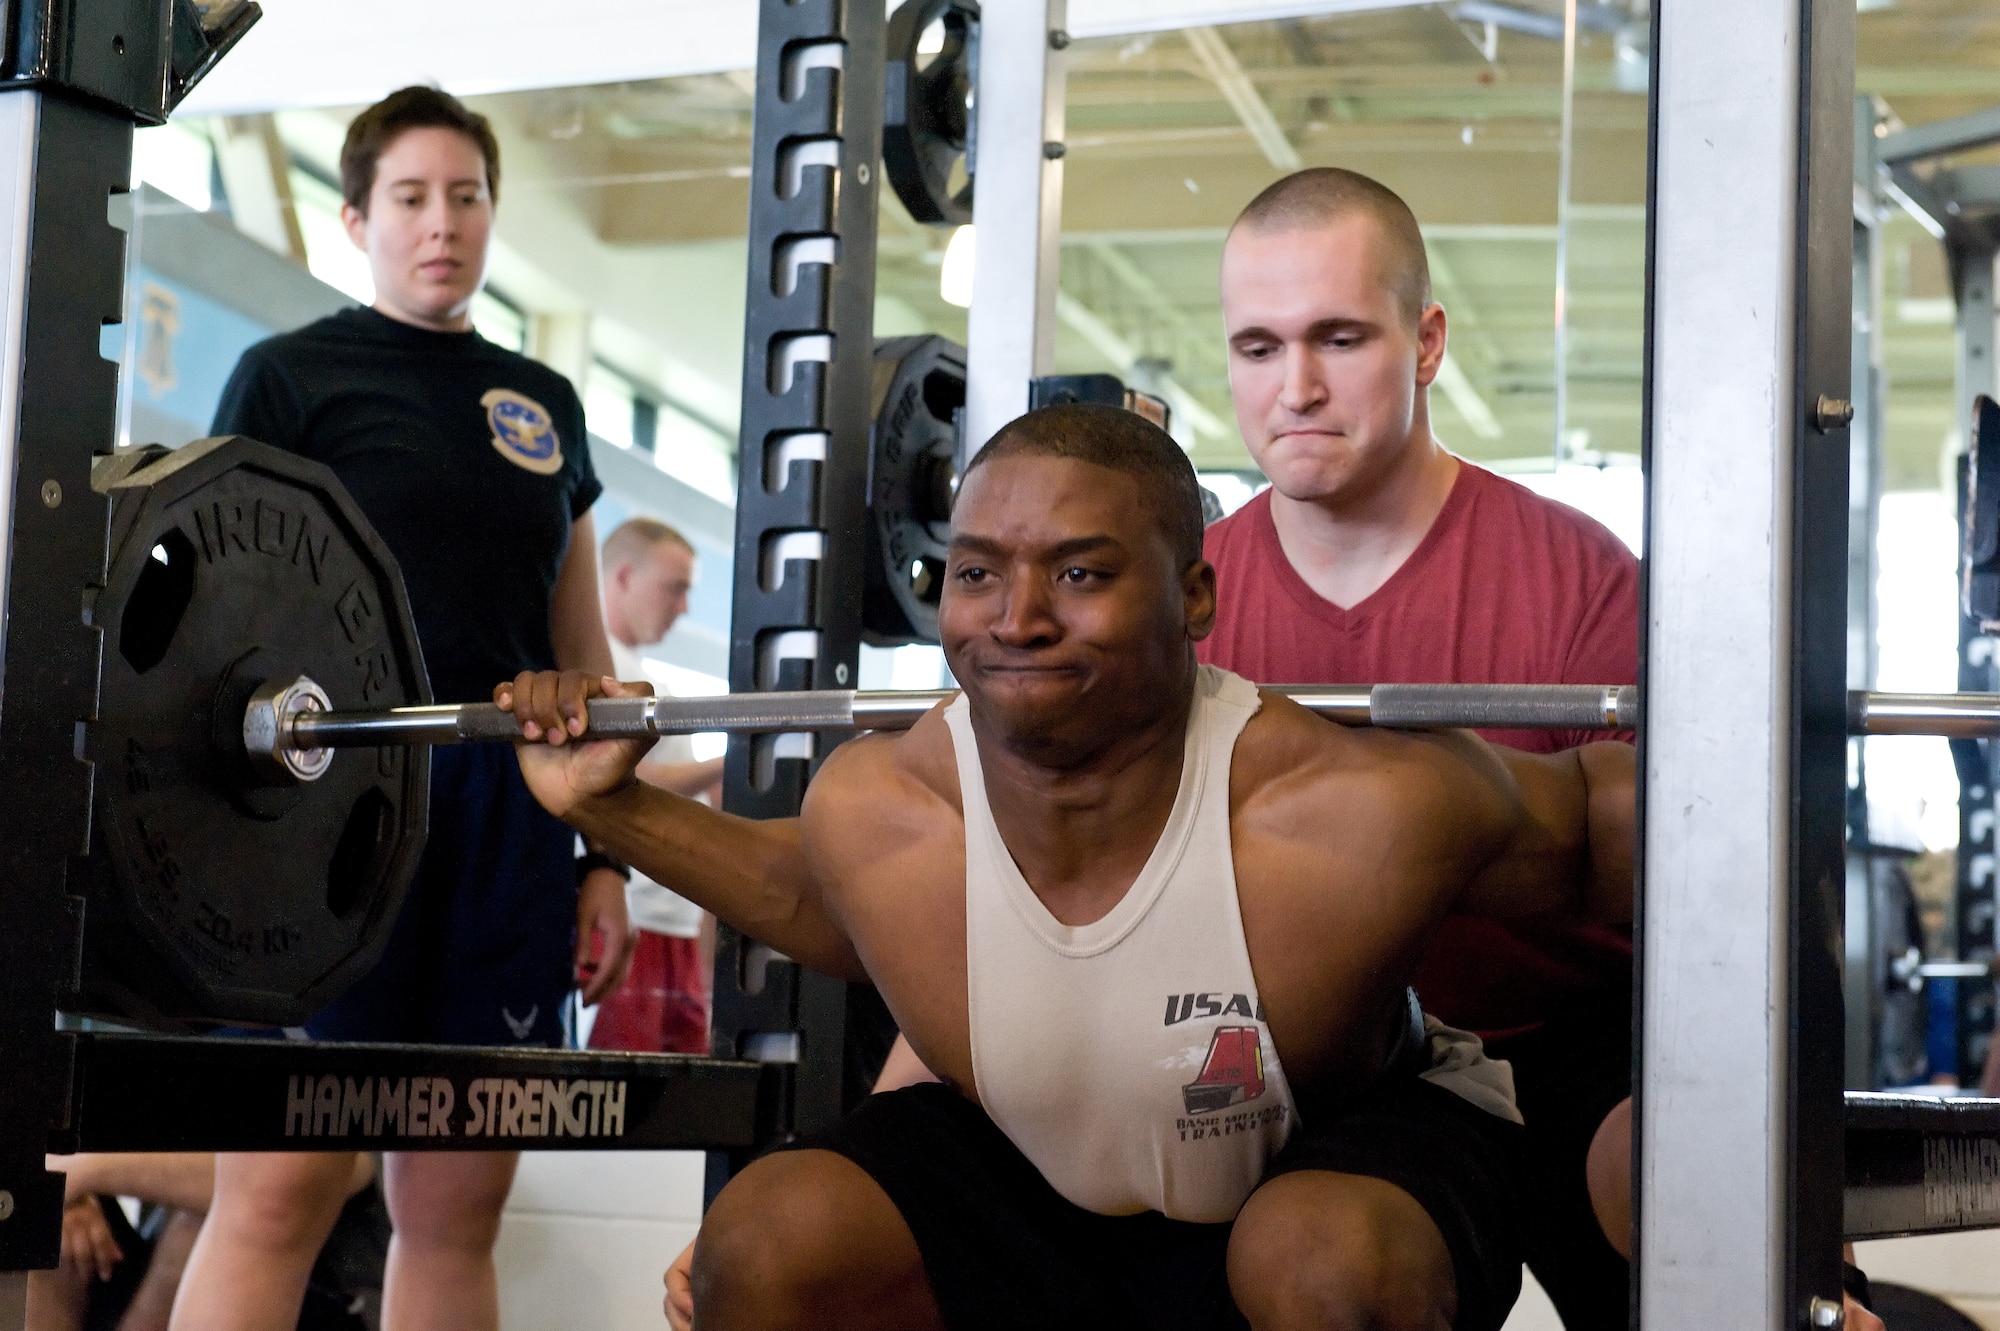 Tavin Alford successfully squats 350 pounds on his first of three attempts in the squat during the powerlifting competition May 8, 2015, at the Fitness Center on Dover Air Force Base, Del. Alford placed first in the male 181-pound weight class and was the overall male winner with a total combined weight of 1,185 pounds for the squat, bench press and deadlift. (U.S. Air Force photo/Roland Balik)